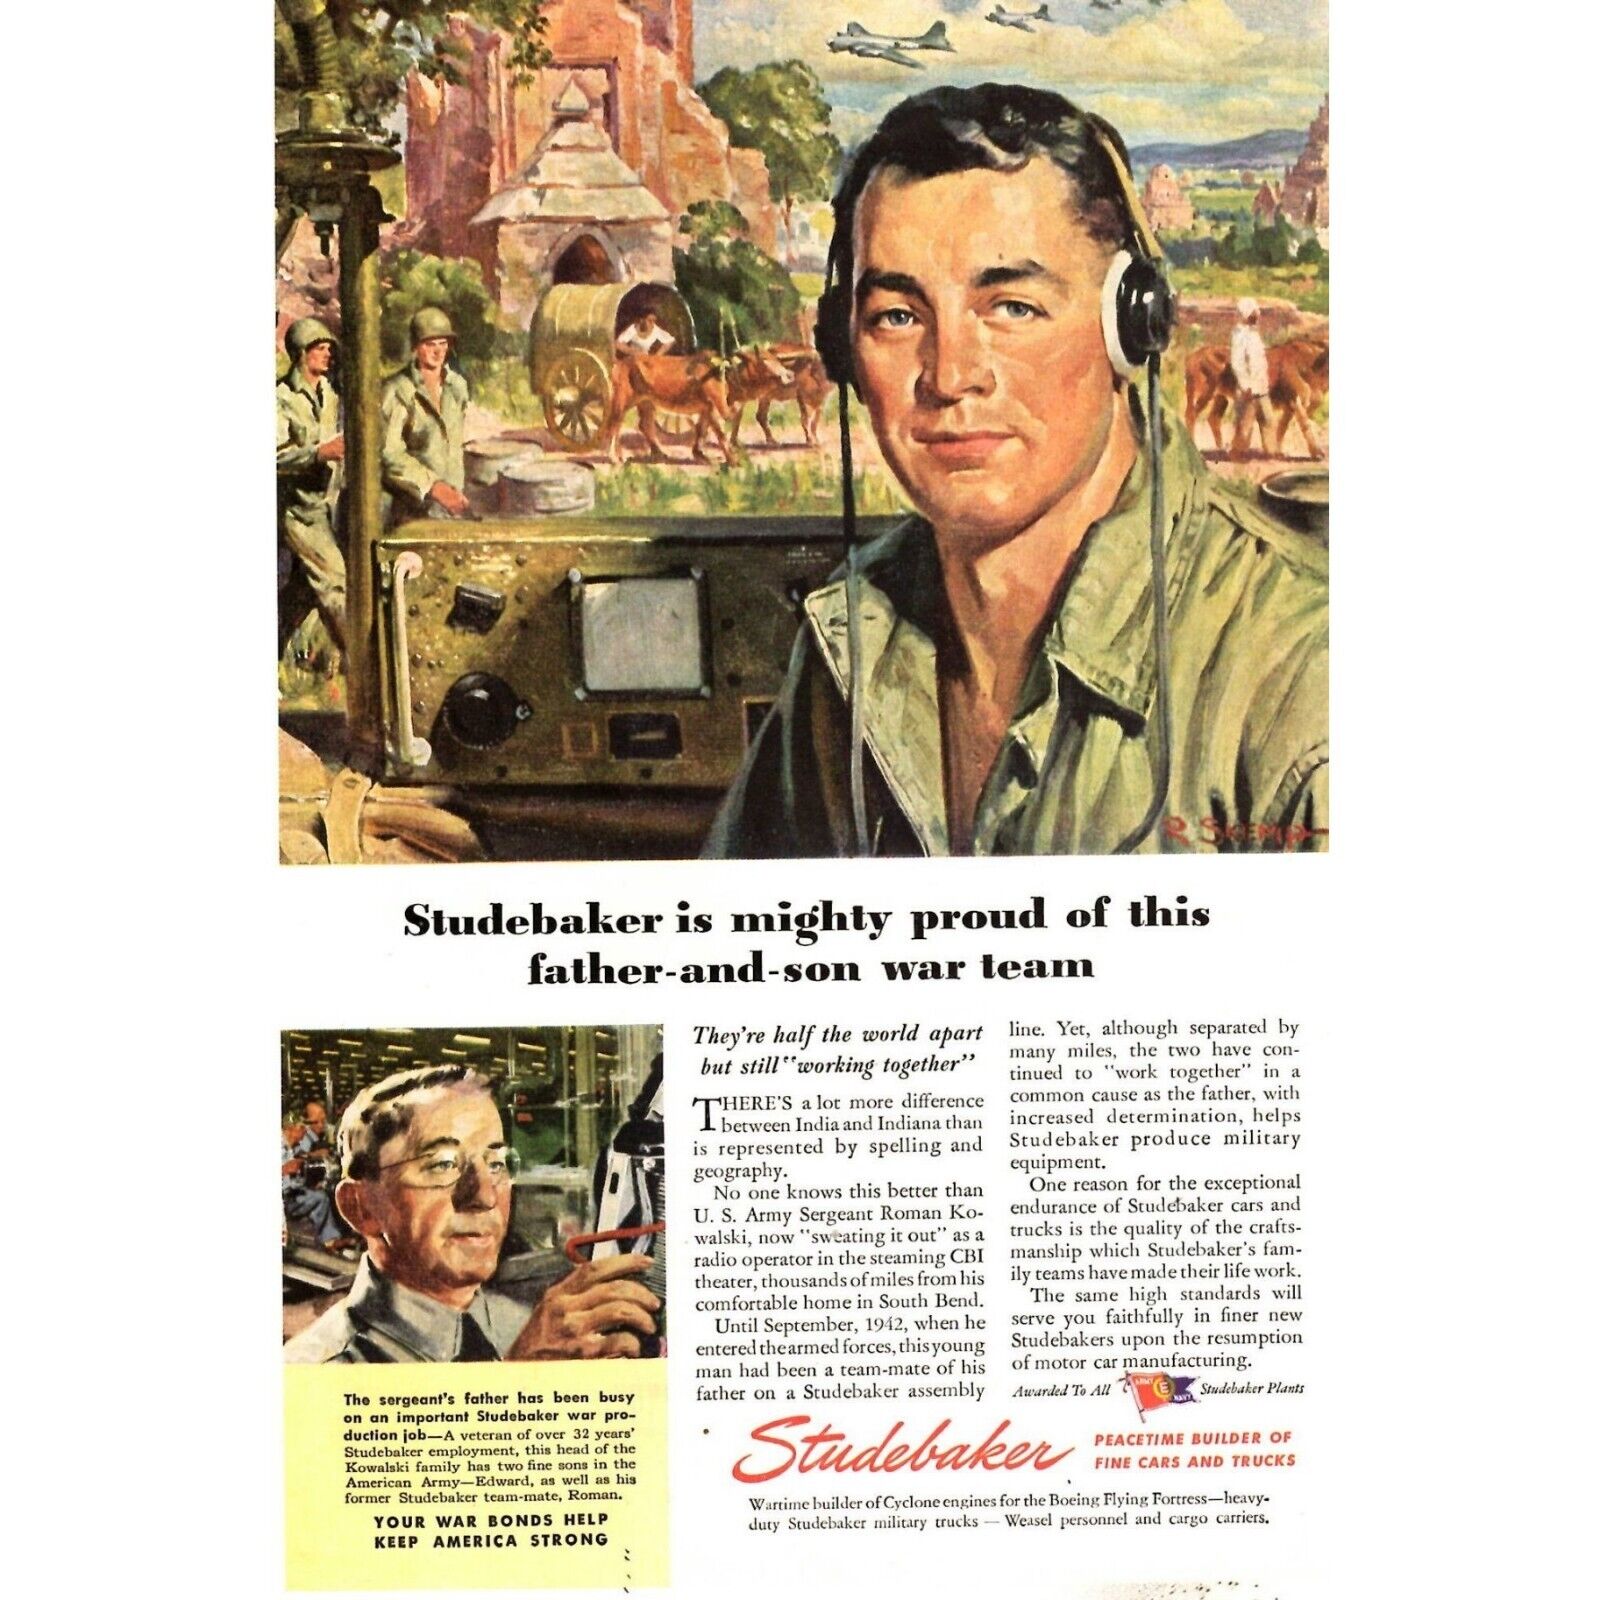 1945 Studebaker Peacetime Builder of Cars and Trucks WWII Print Ad Father & Son